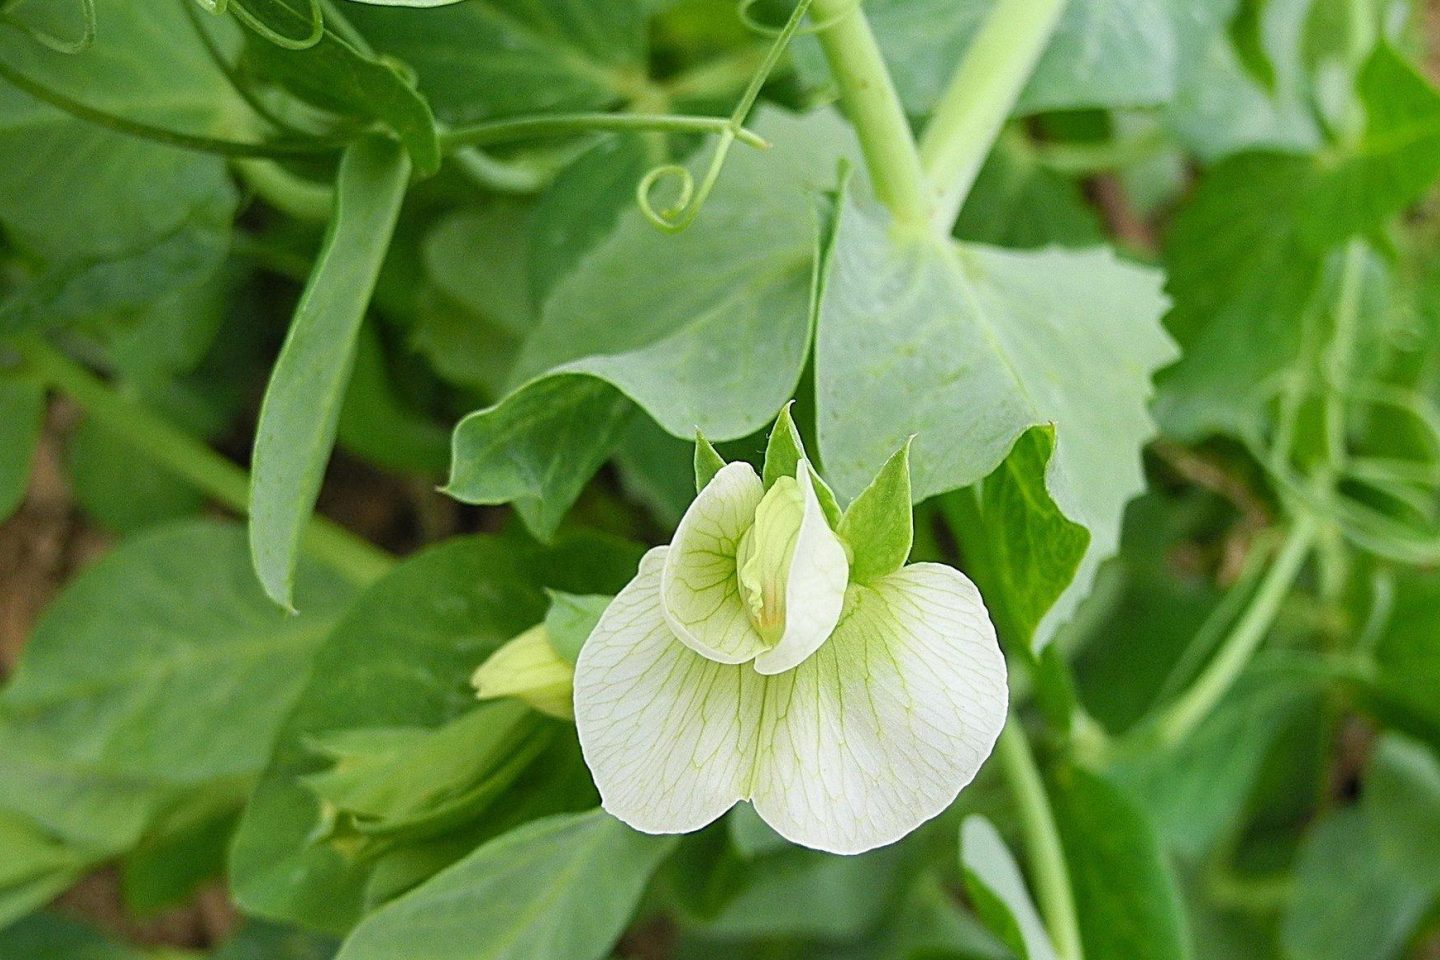 A pea flower